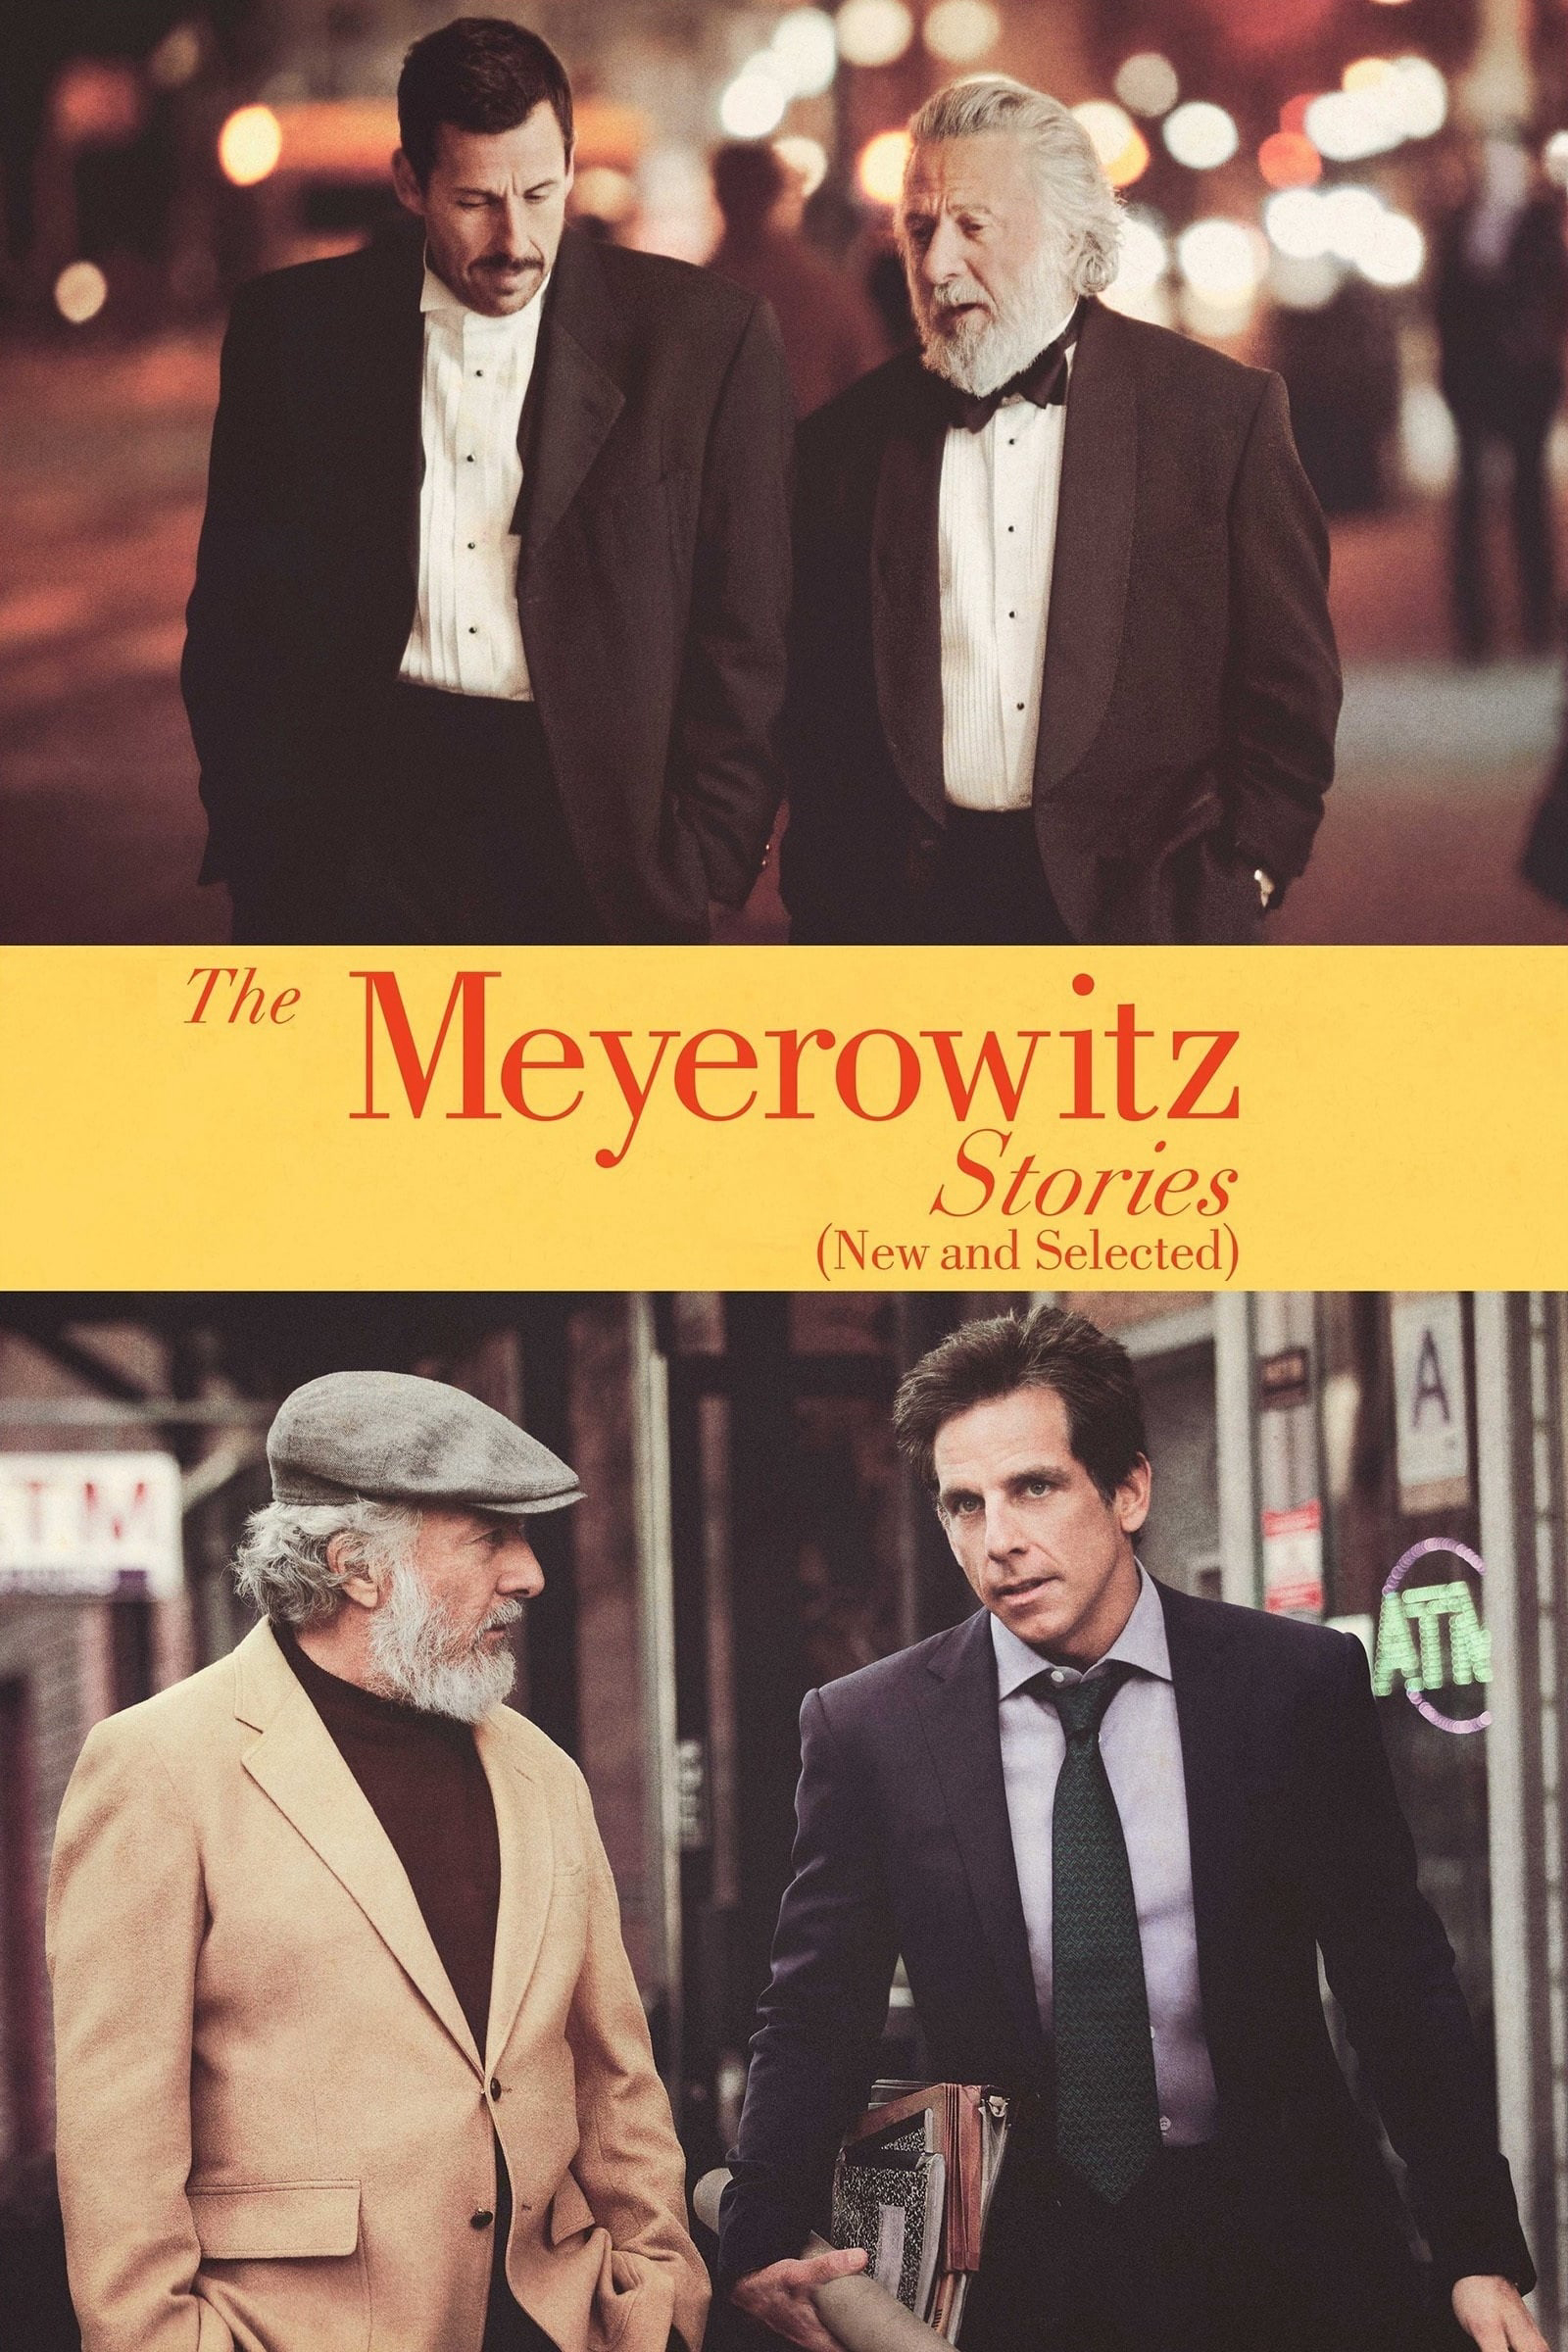 Poster Phim Chuyện Nhà Meyerowitz (The Meyerowitz Stories (New and Selected))